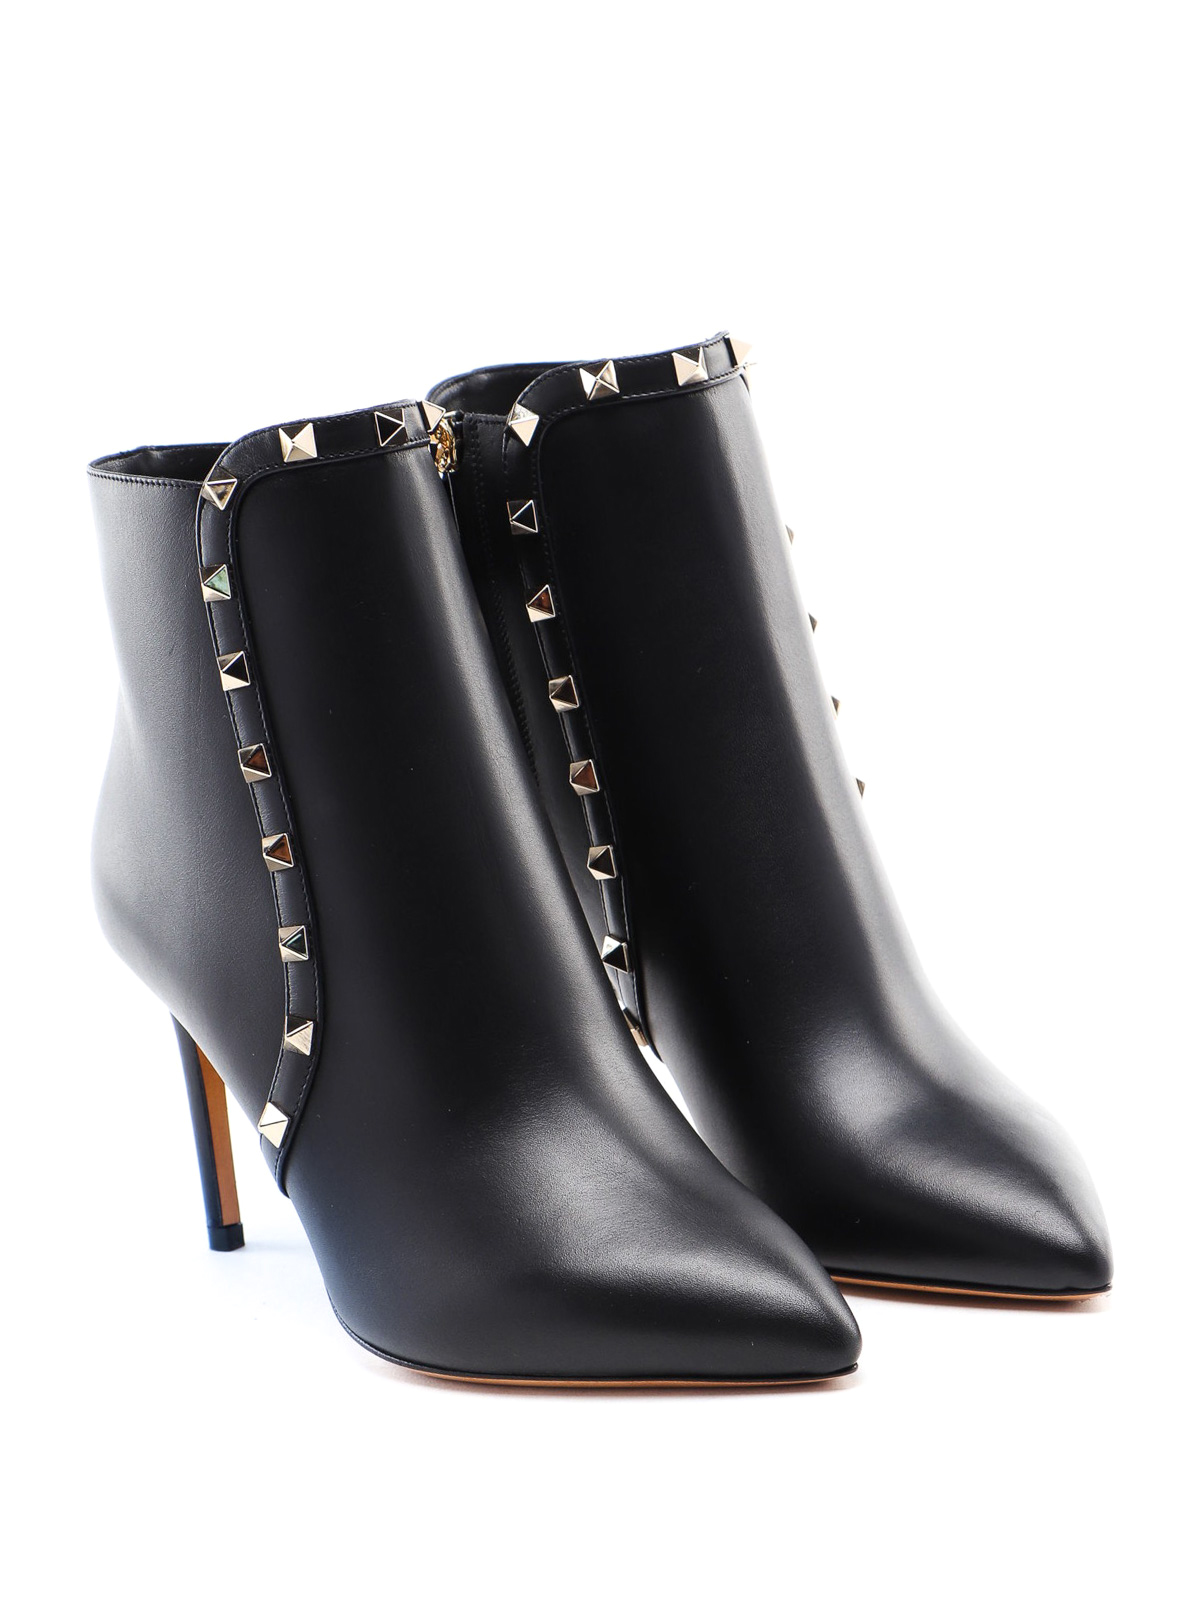 leather booties - ankle boots 